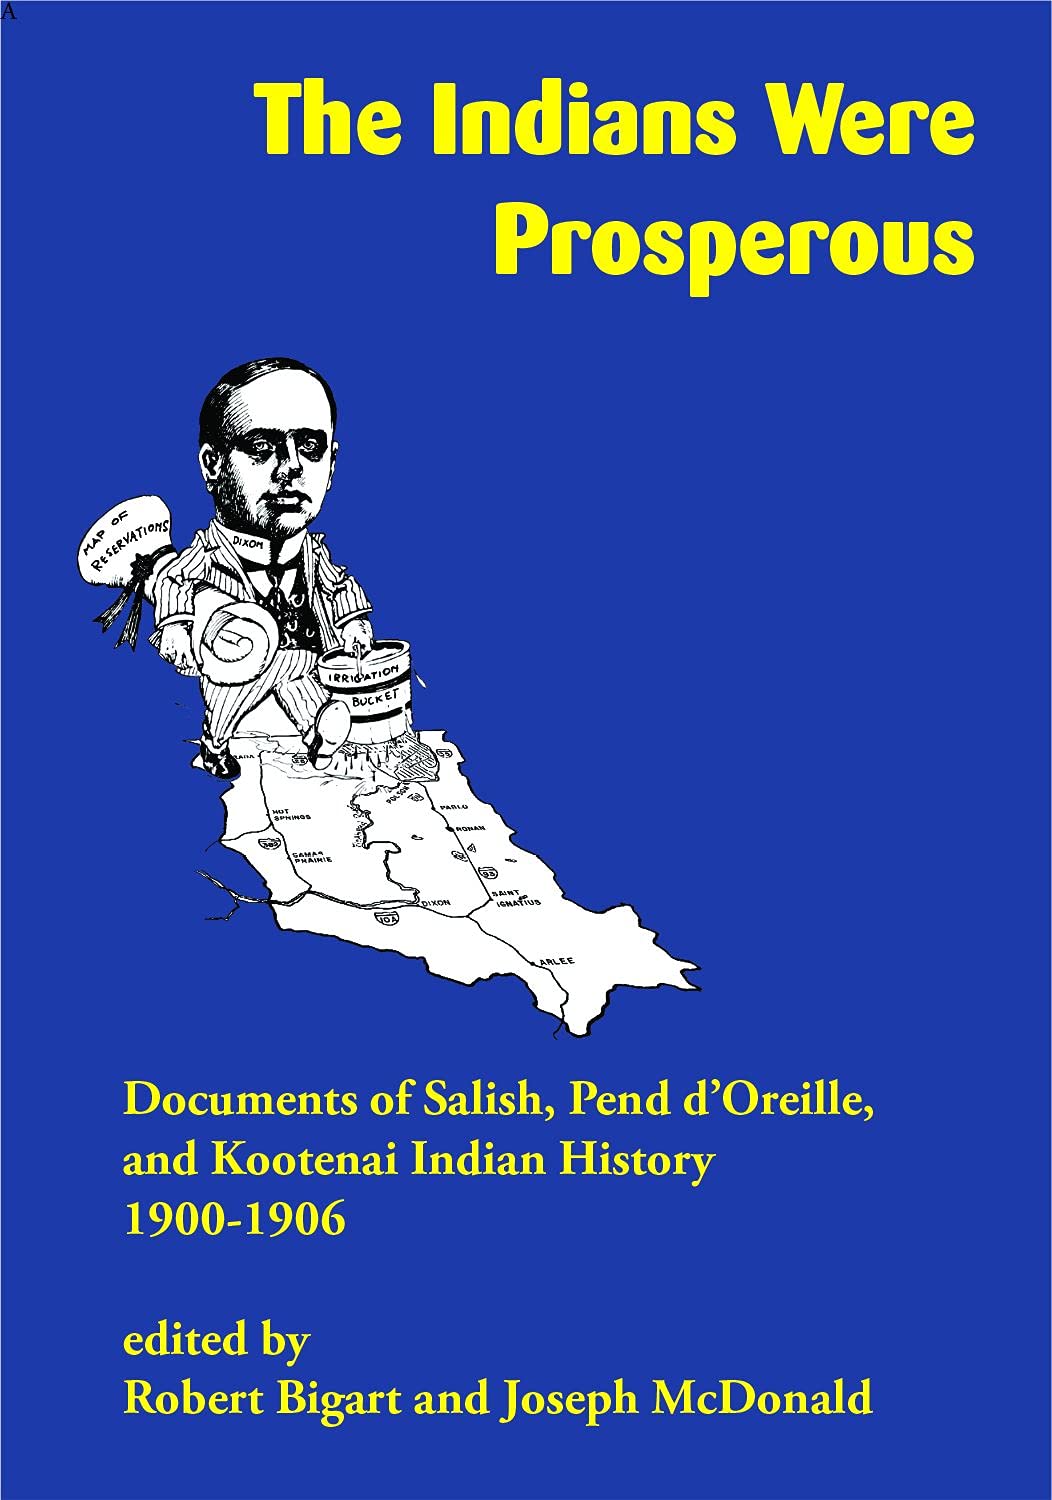 The Indians Were Prosperous: Documents of Salish, Pend d'Oreille, and Kootenai Indian History, 1900-1906 edited by Robert Bigart & Joseph McDonald